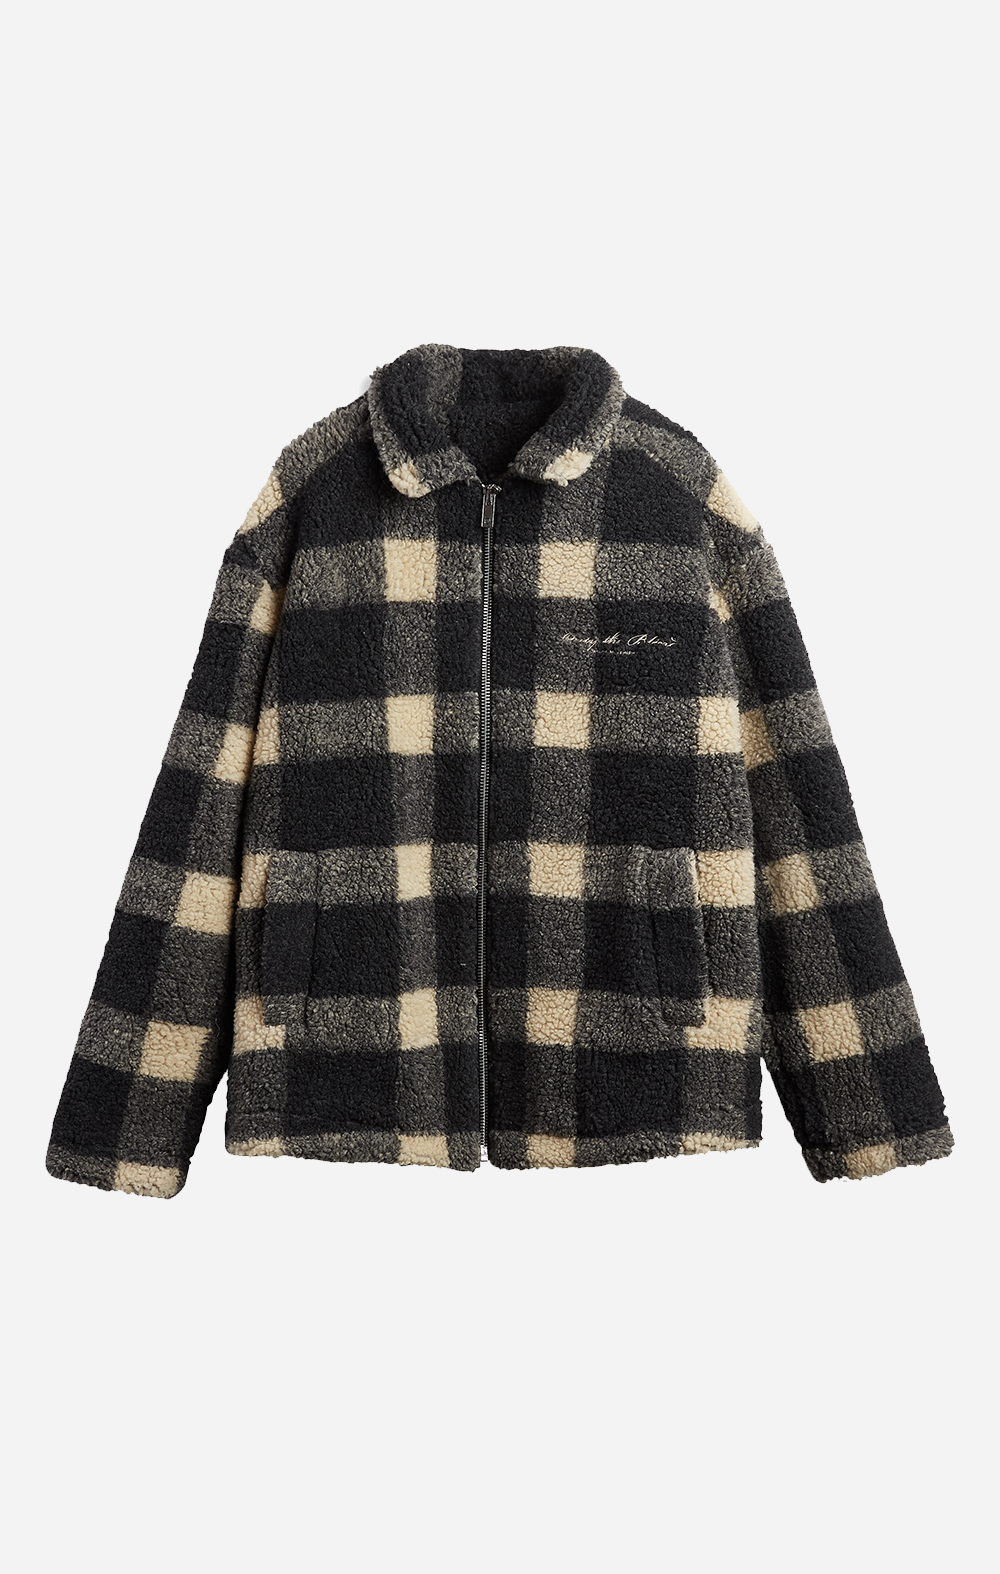 ONLY THE BLIND - Beige Check Borg Jacket – ONLY THE BLIND™